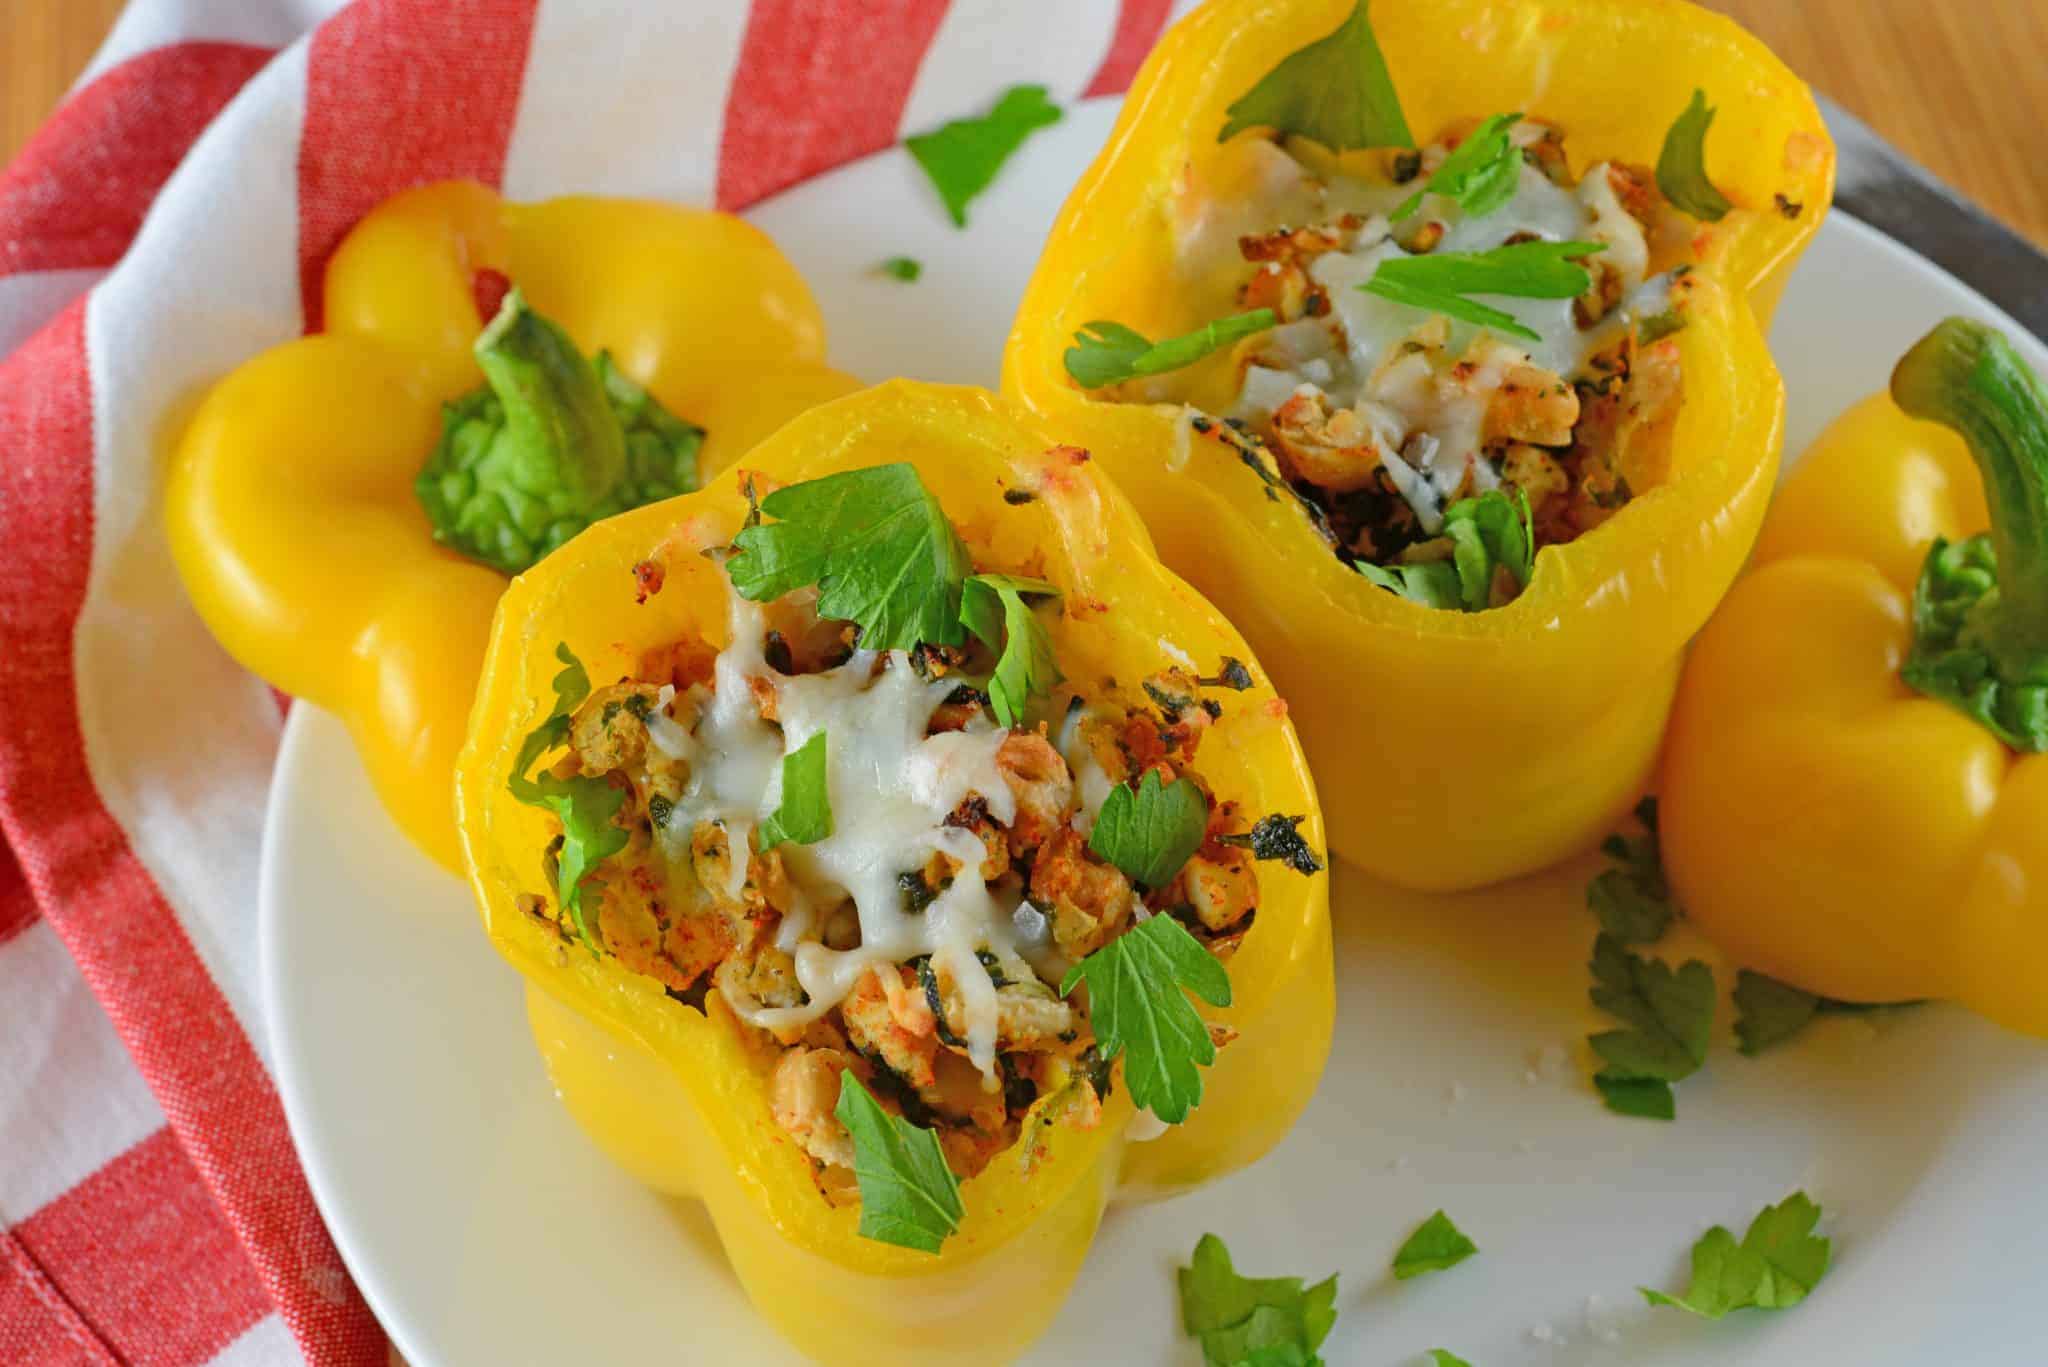 Turkey Stuffed Peppers are filled with spinach, onion, garlic, white beans and cheese. An easy and healthy dinner idea.